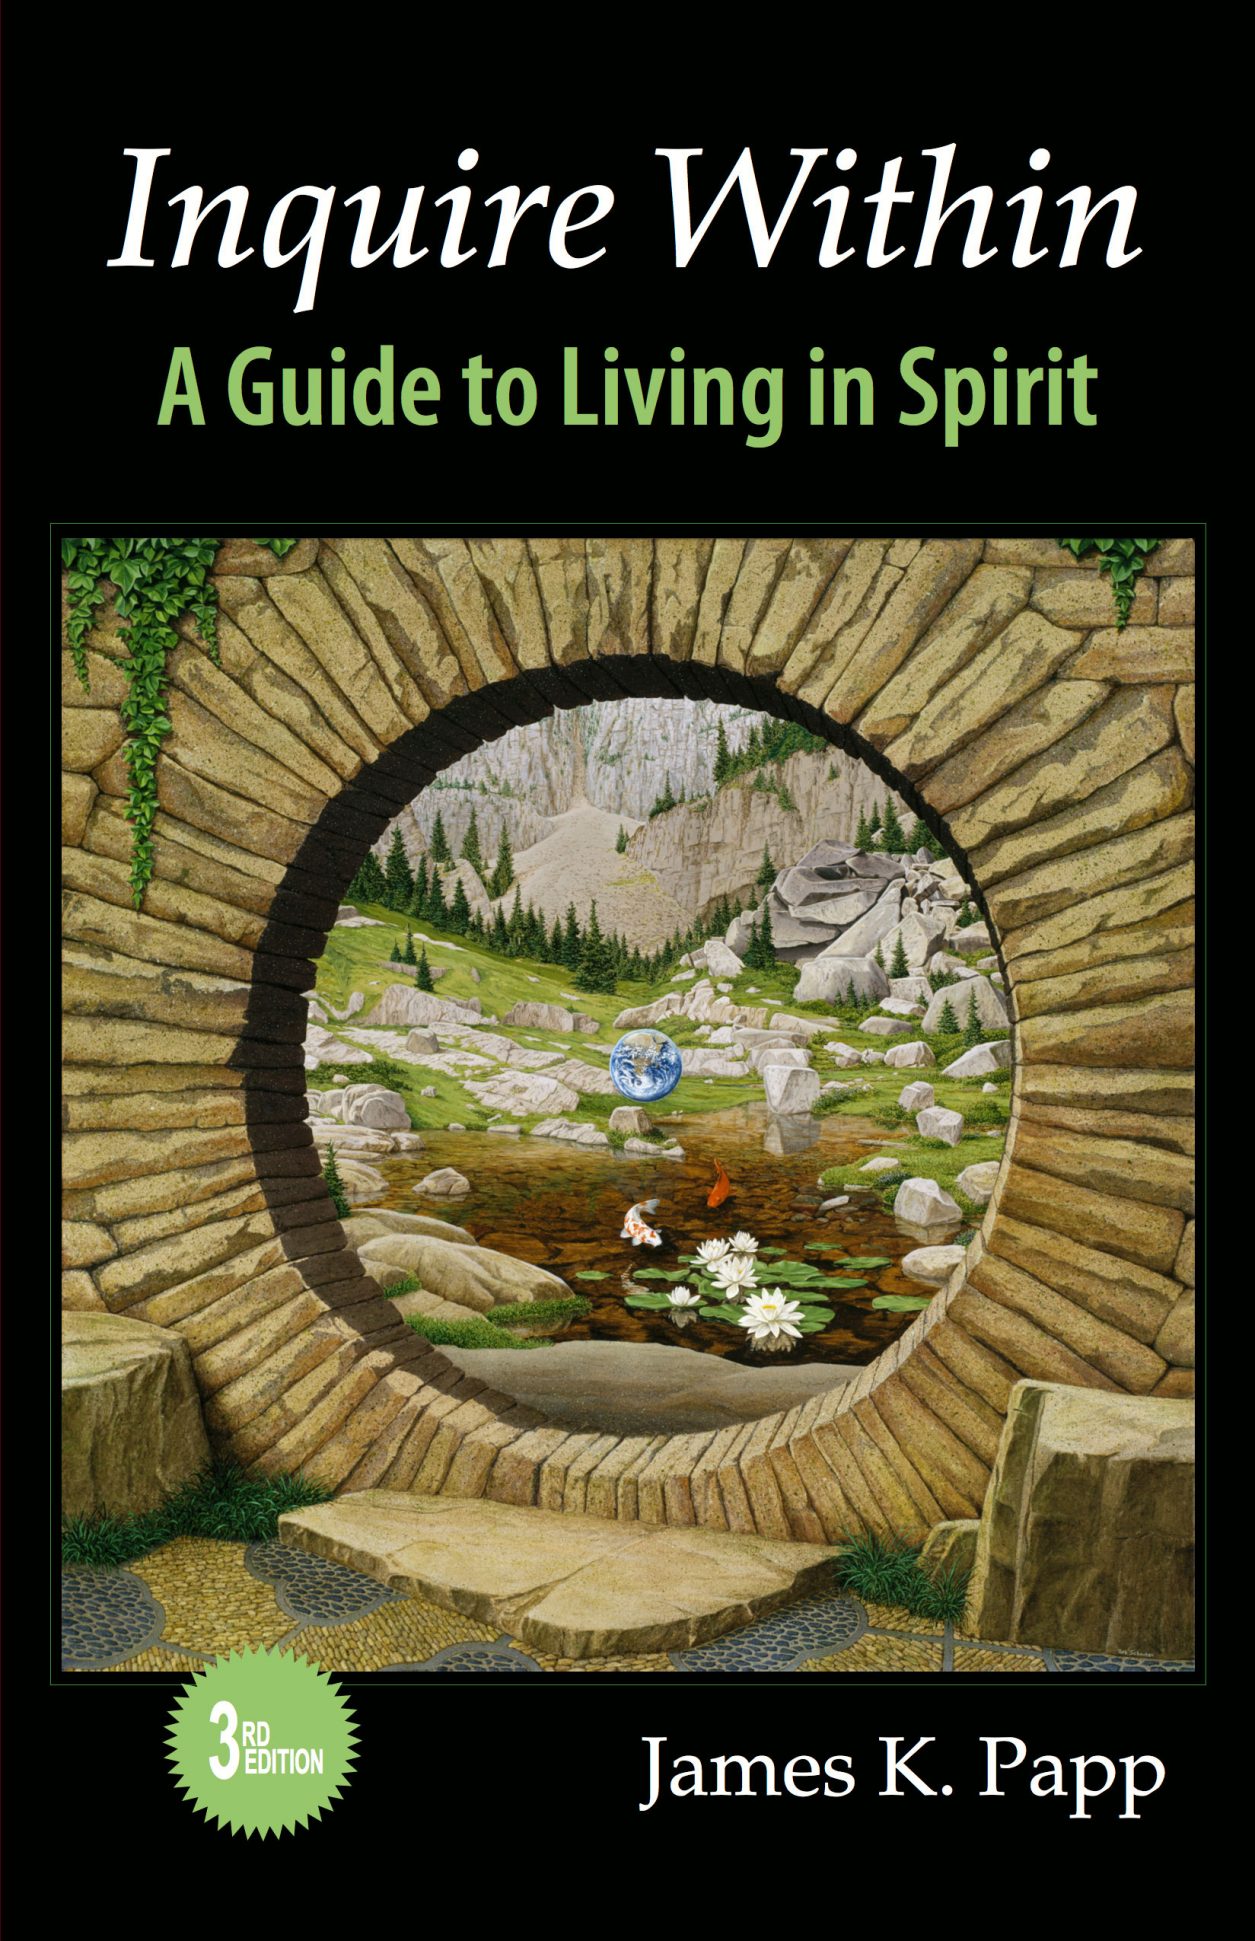 Inquire Within: A Guide to Living in Spirit by James K. Papp